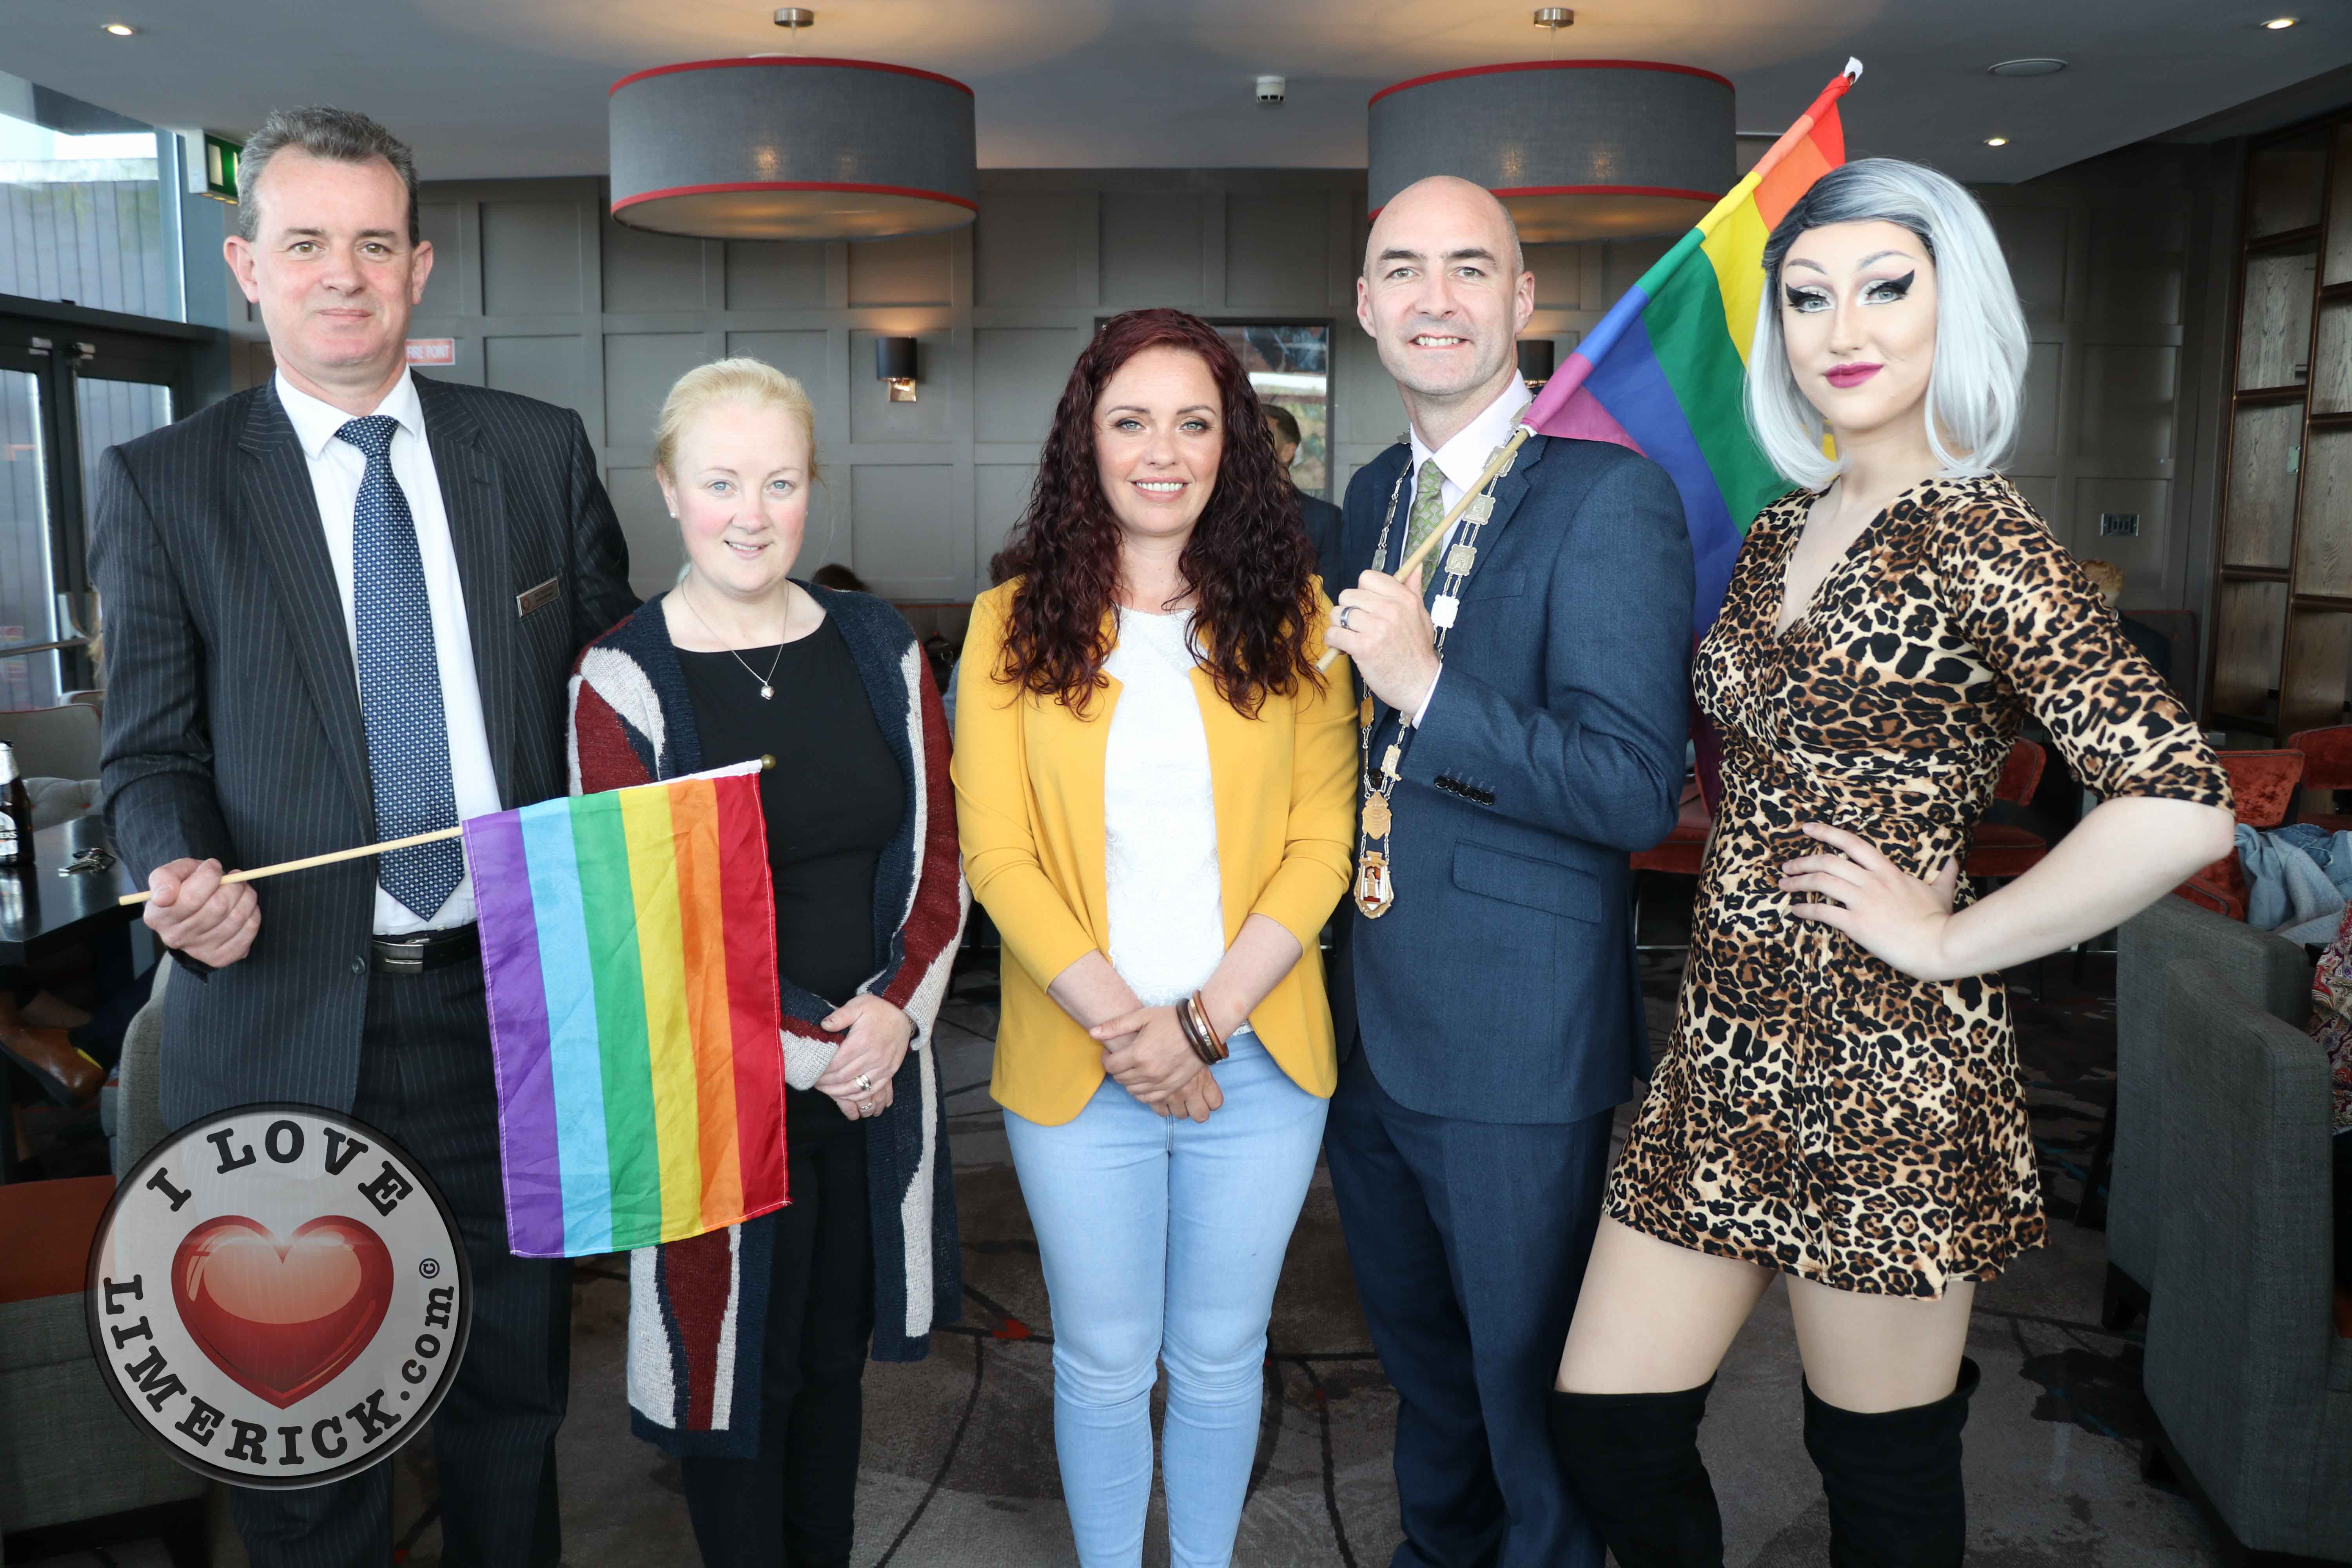 Pictured at the Limerick Pride 2019 Press Launch at the Clayton Hotel are Pat Reddan, Manager Clayton Hotel Limerick, Cllr Sarah Kiely, Janesboro, Lisa Daly, Chairperson Limerick Pride, Metropolitan Mayor Daniel Butler and Sarah Tonkin,  Castletroy. Picture: Conor Owens/ilovelimerick